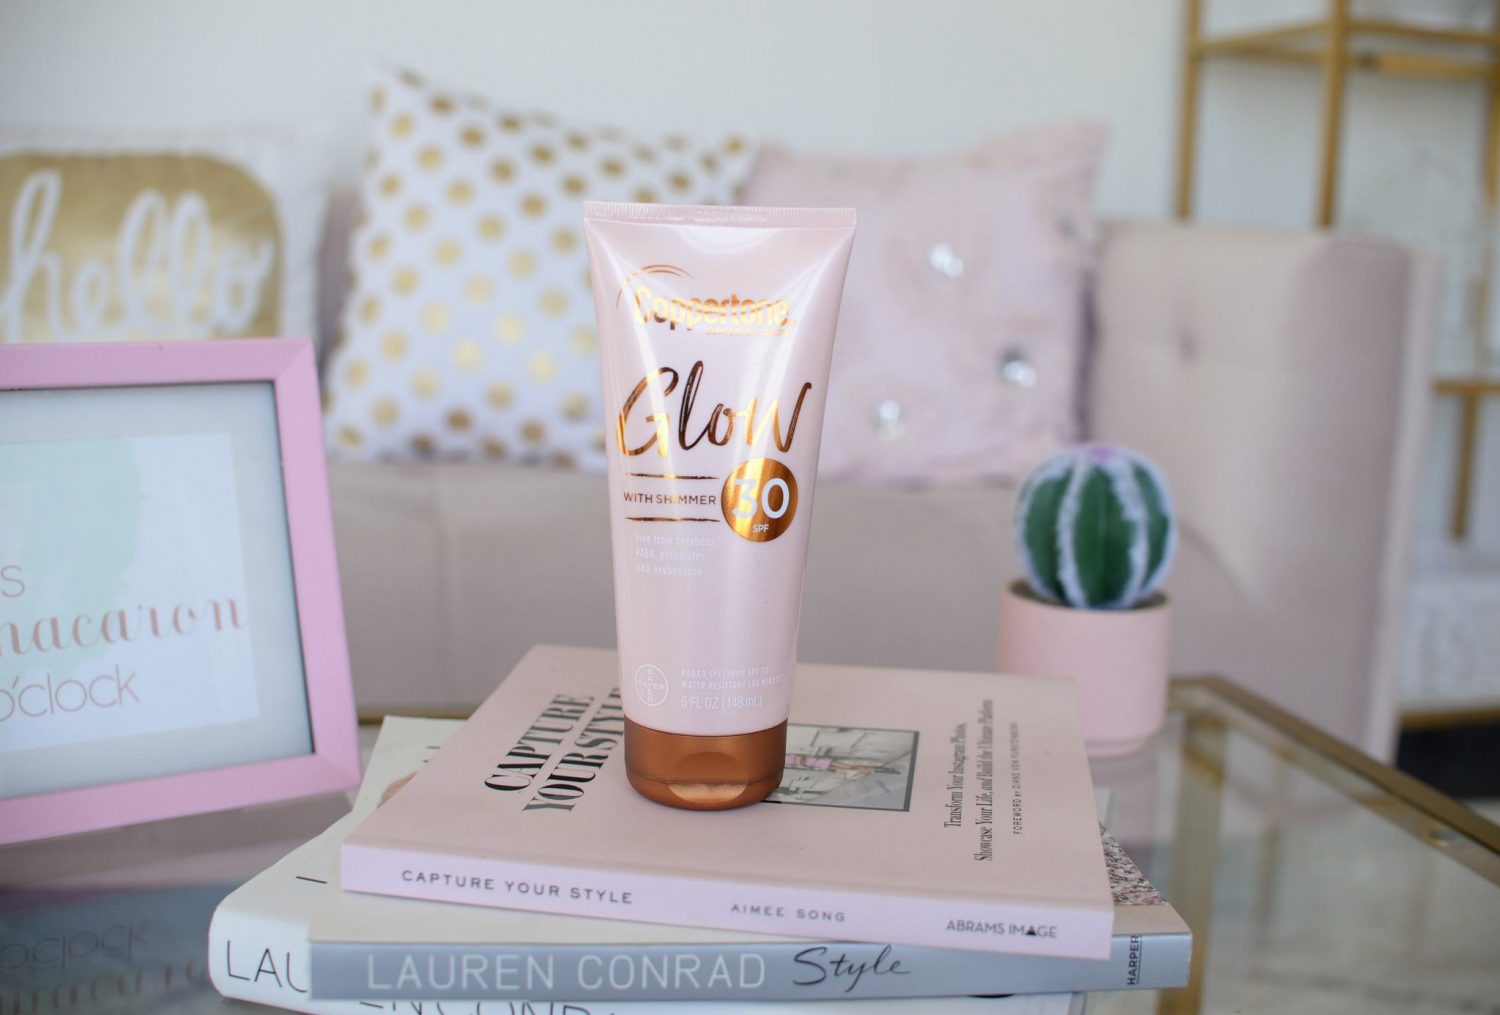 Coppertone Glow with Shimmer SPF30 